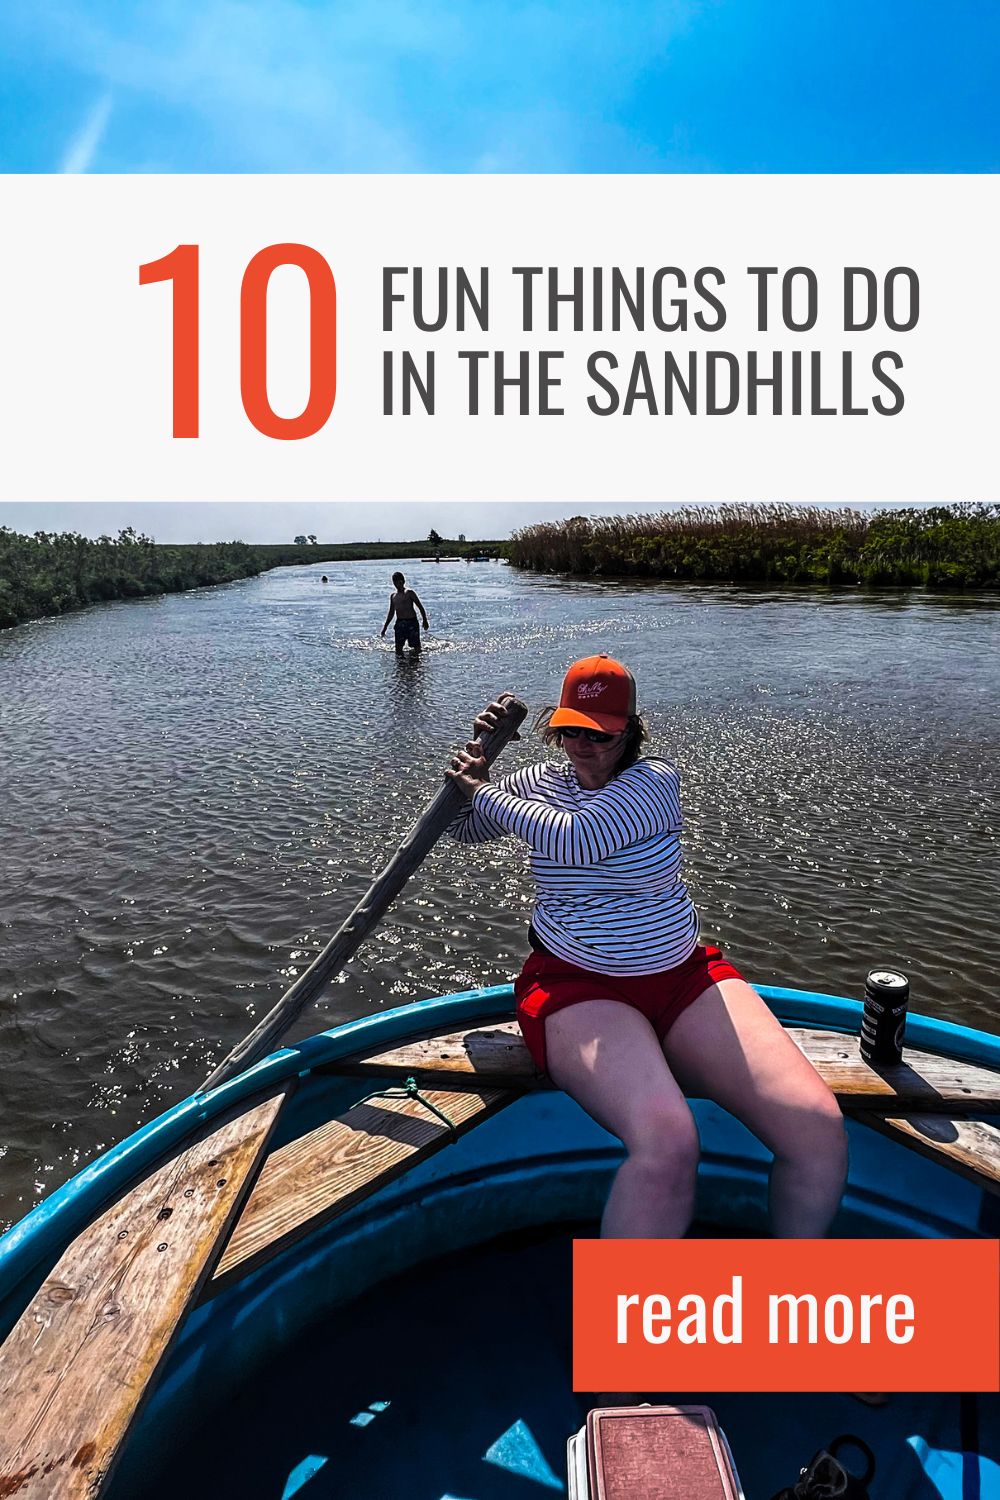 The Nebraska Sandhills are unlike any other place in the state. Here's a guide to fun things to do in the Sandhills, from tanking to exploring the quirky towns.